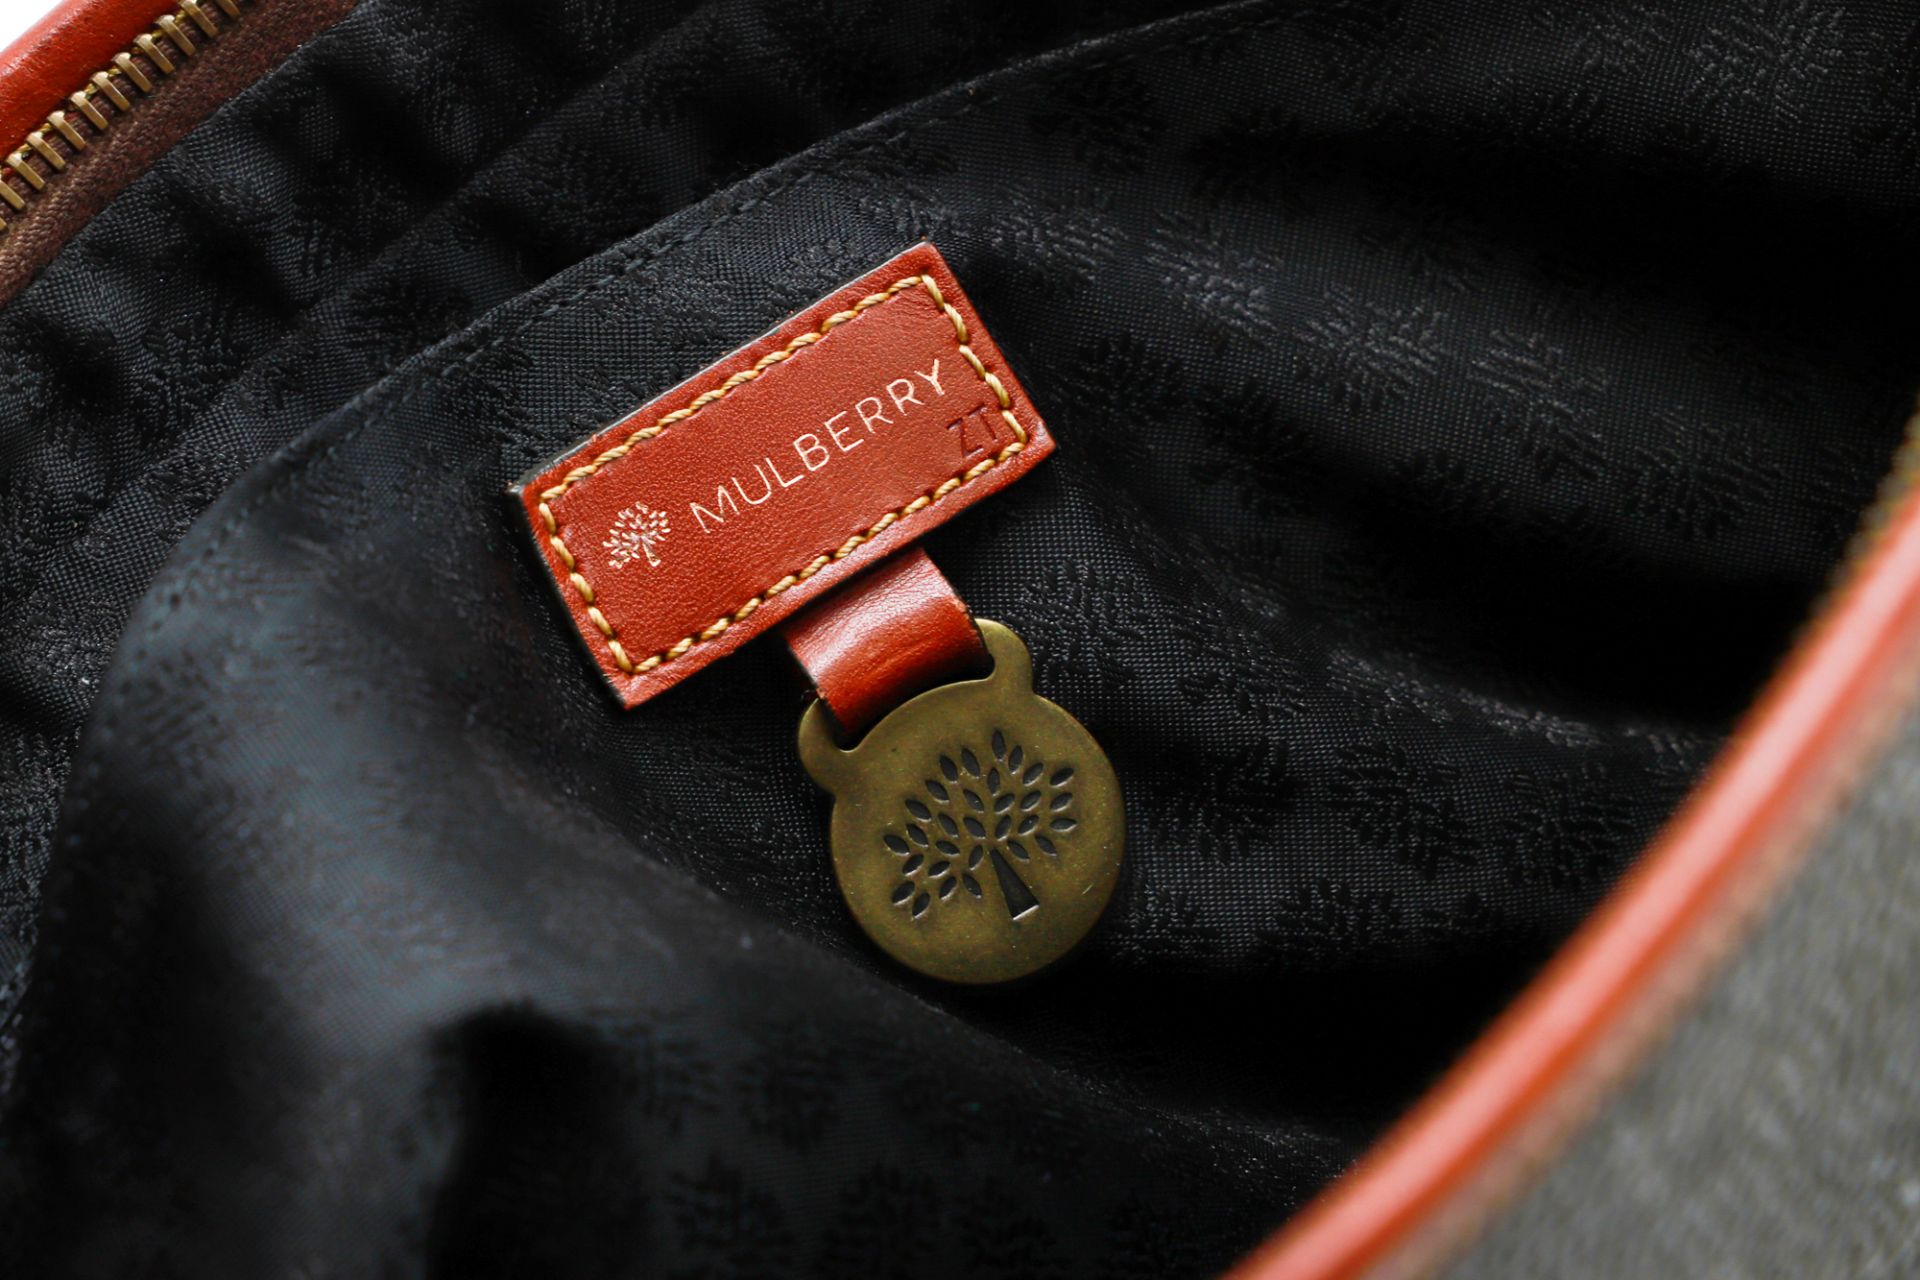 A MULBERRY LEATHER TOTE HANDBAG, the shoulder bag embossed with “Mulberry tag” on the internal - Bild 2 aus 2